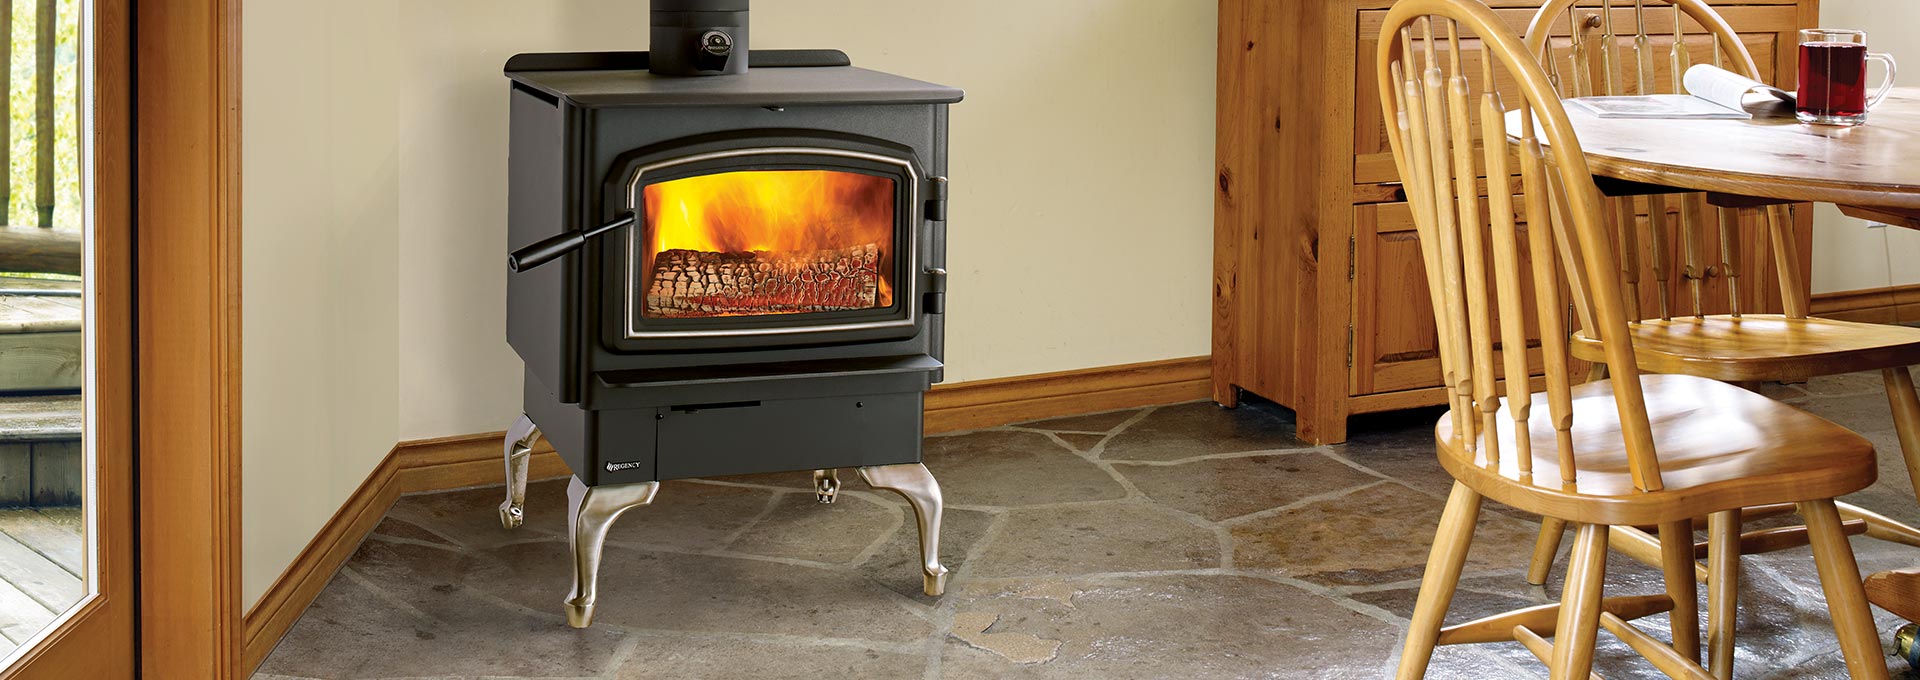 Small Gas Fireplace Stove Best Of Wood Stoves